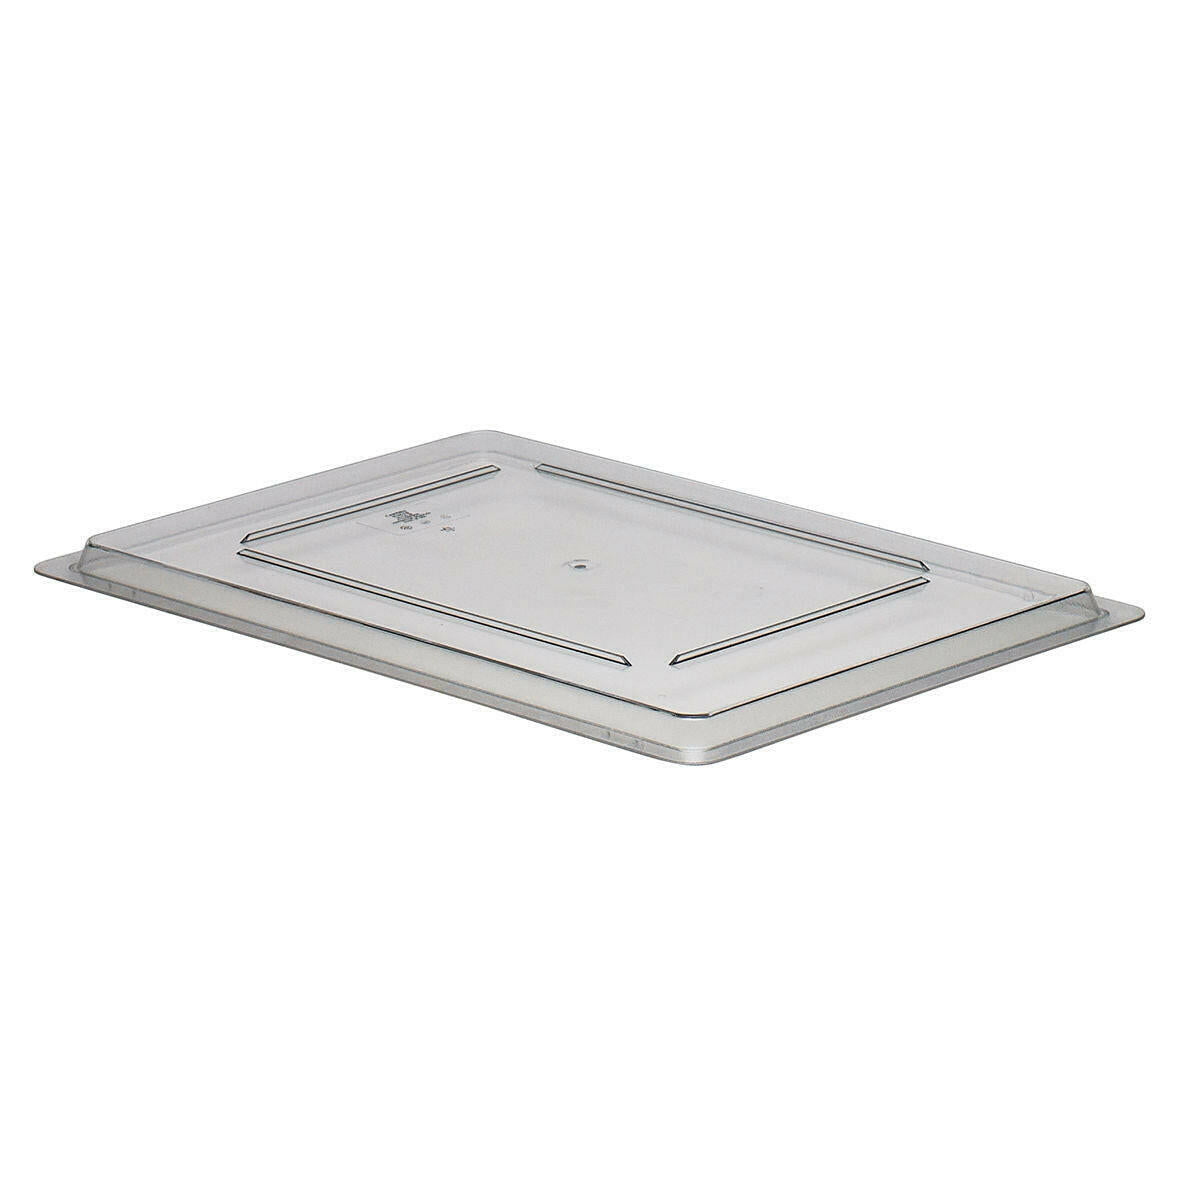 Cambro 1/1 Camwear Gastronorm Polycarbonate Flat Lid